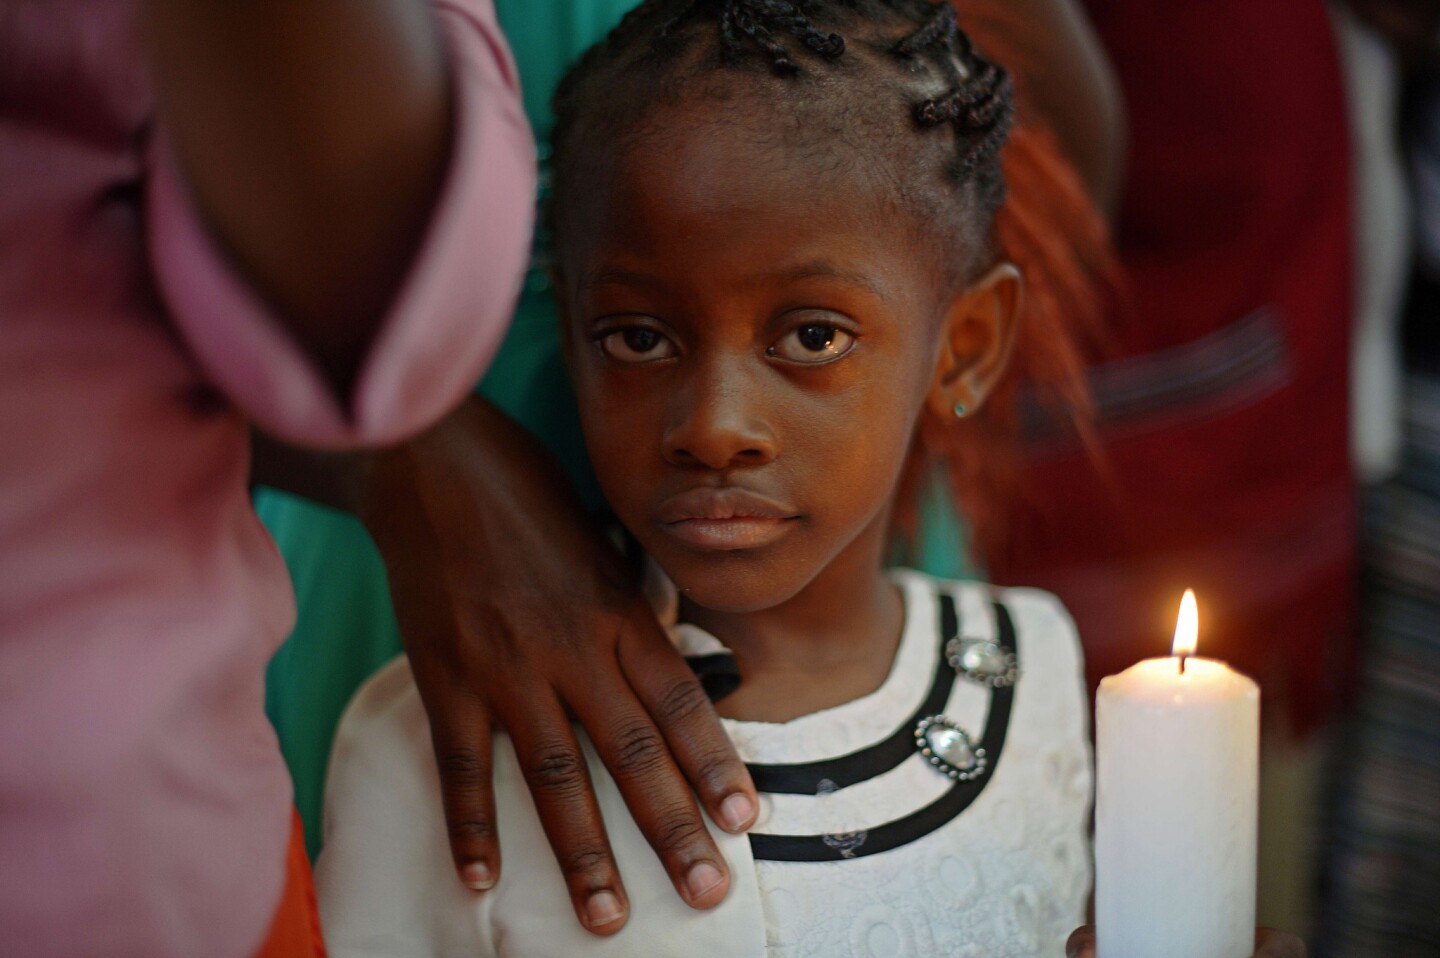 A girl holds a candle during Easter service at the Catholic cathedral in Garissa, where worshipers mourned victims of last week's massacre.